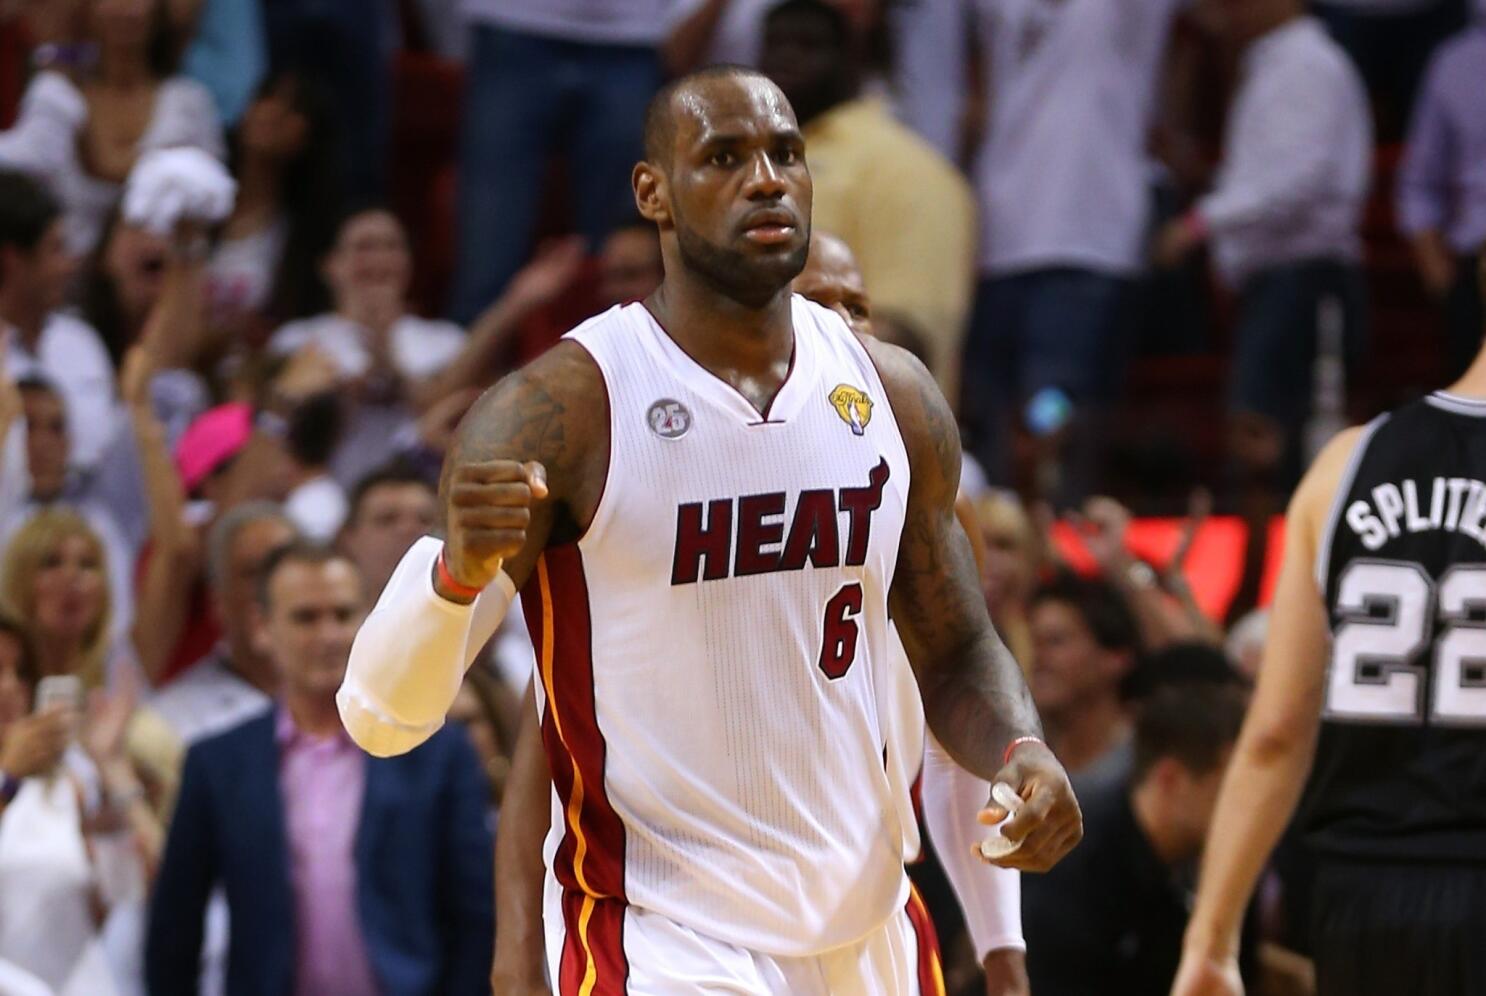 Poll: Should LeBron James wear his headband in NBA Finals Game